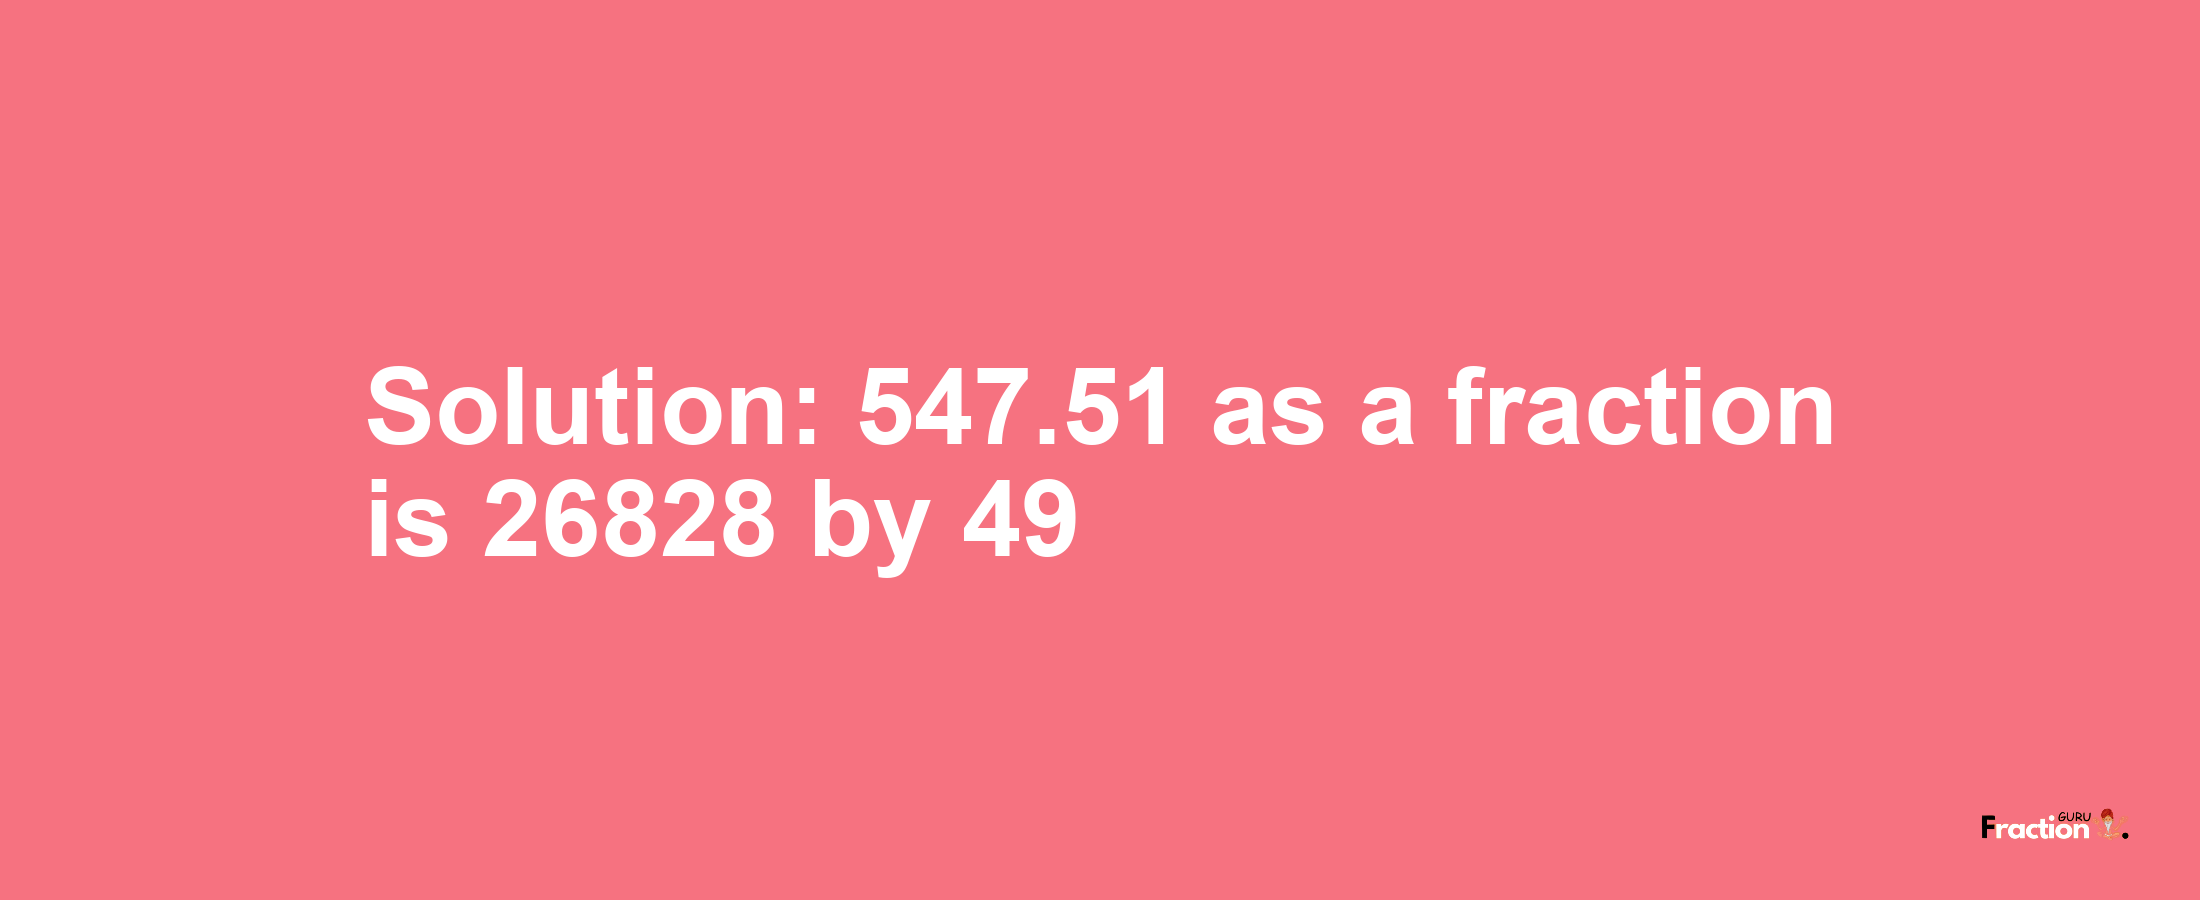 Solution:547.51 as a fraction is 26828/49